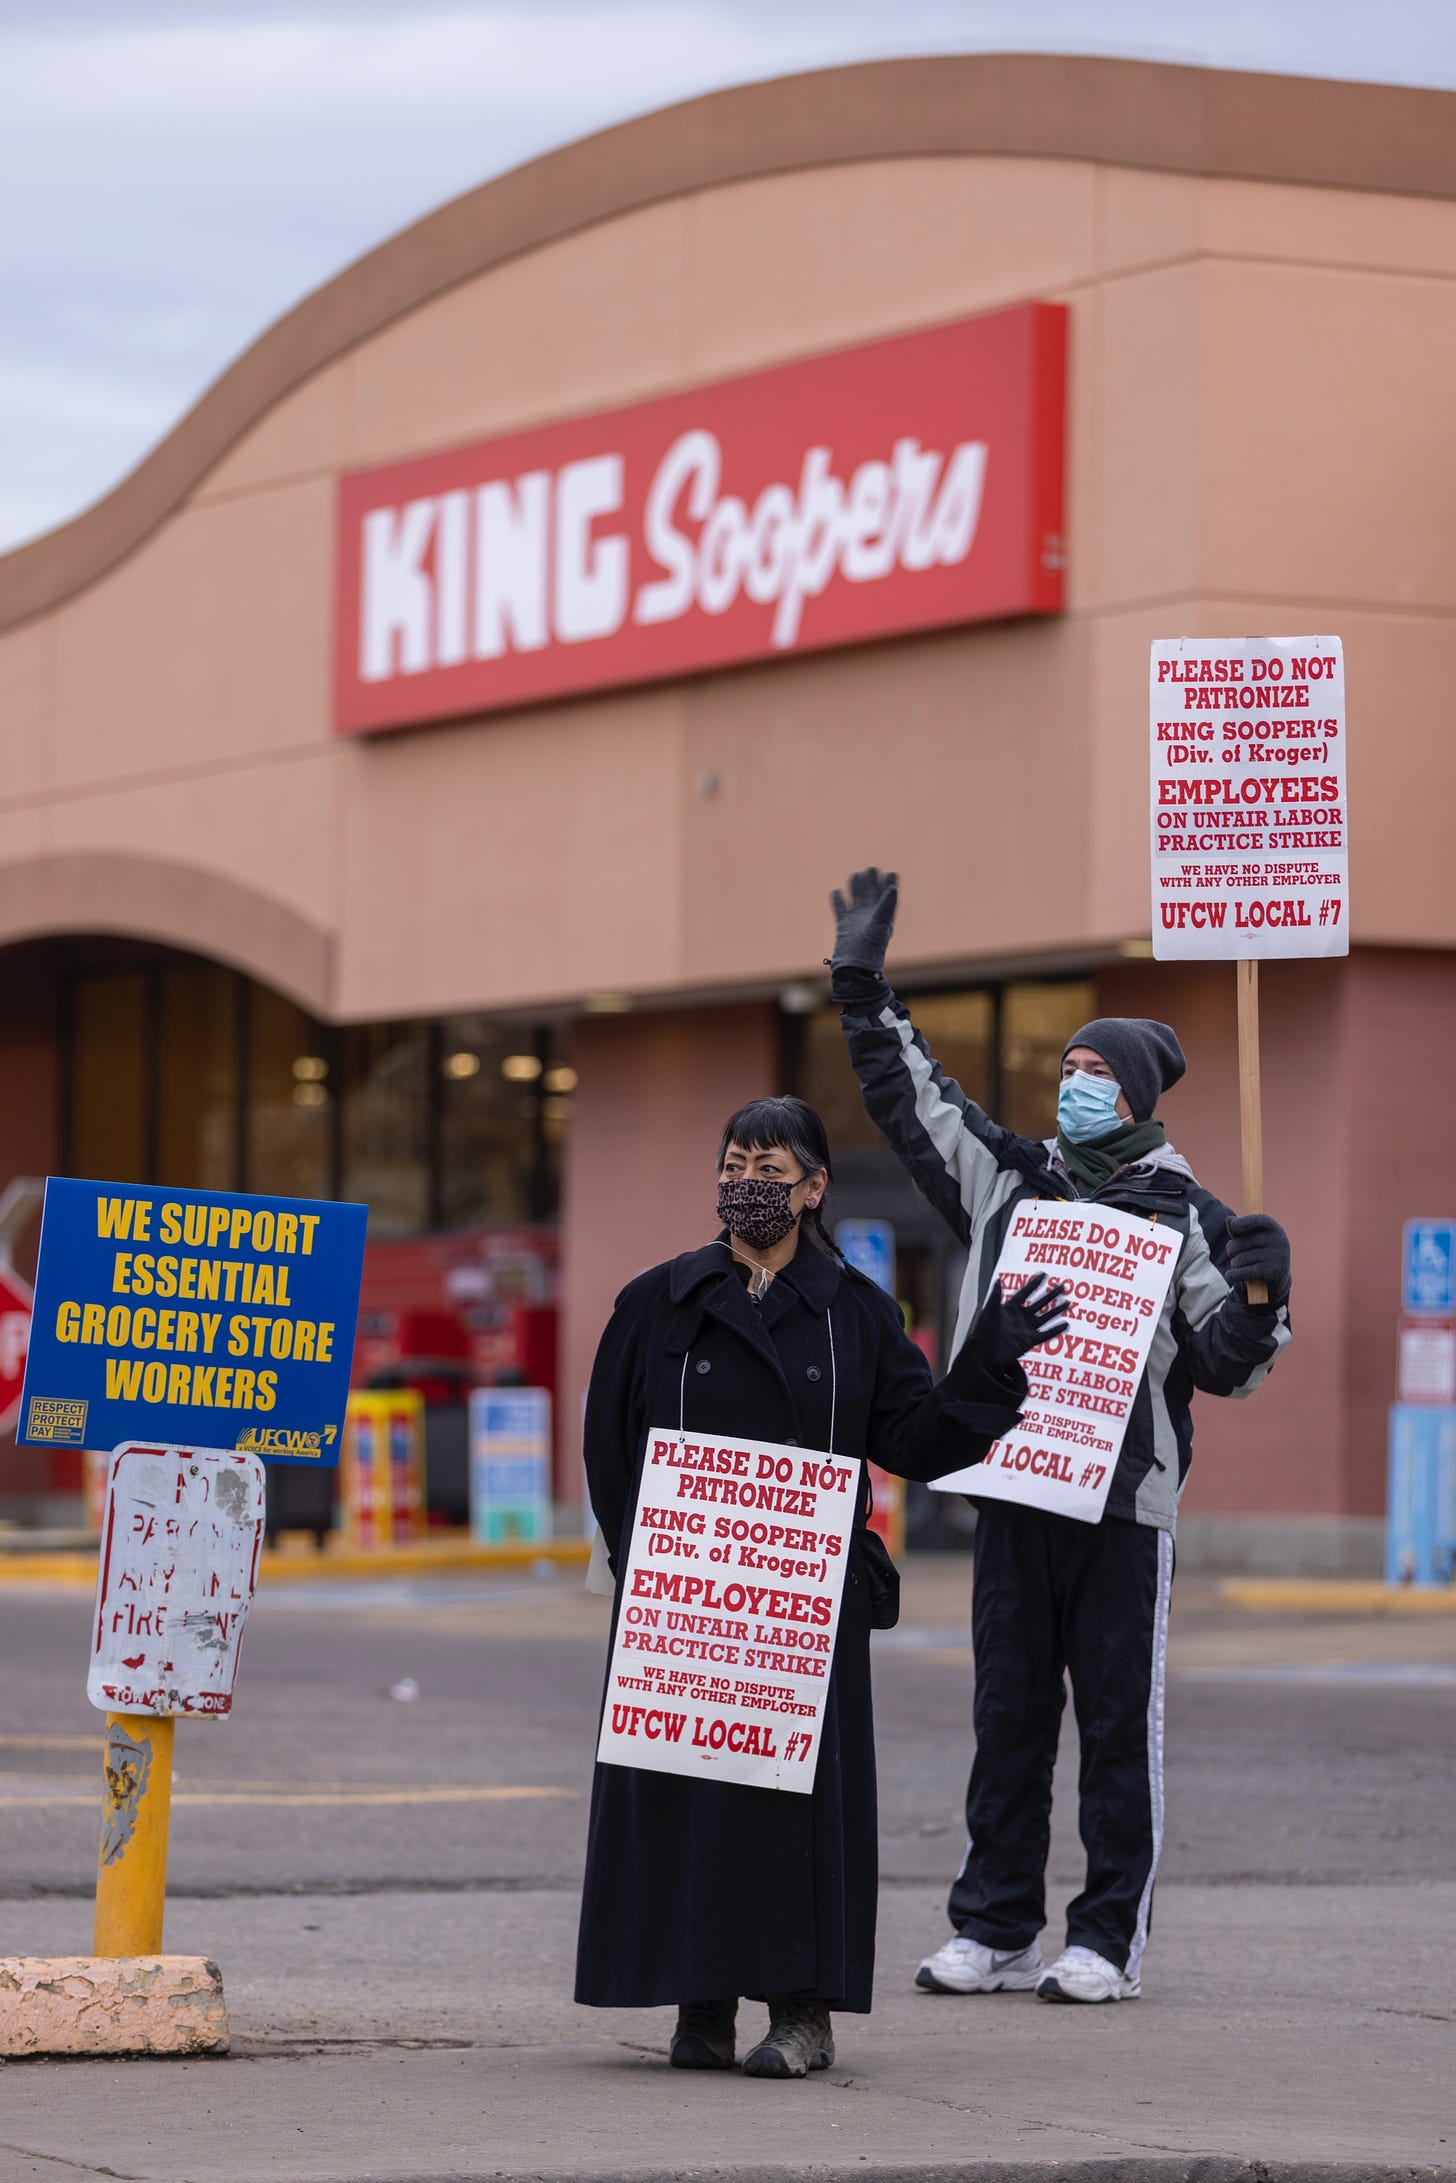 Gigi Jones said she is striking because she currently has to work overtime at her King Soopers job and work part-time at two other jobs to pay her bills. She is hoping a new contract could help her work less. Gigi removed her mask for the portrait then put it back on to return to picketing